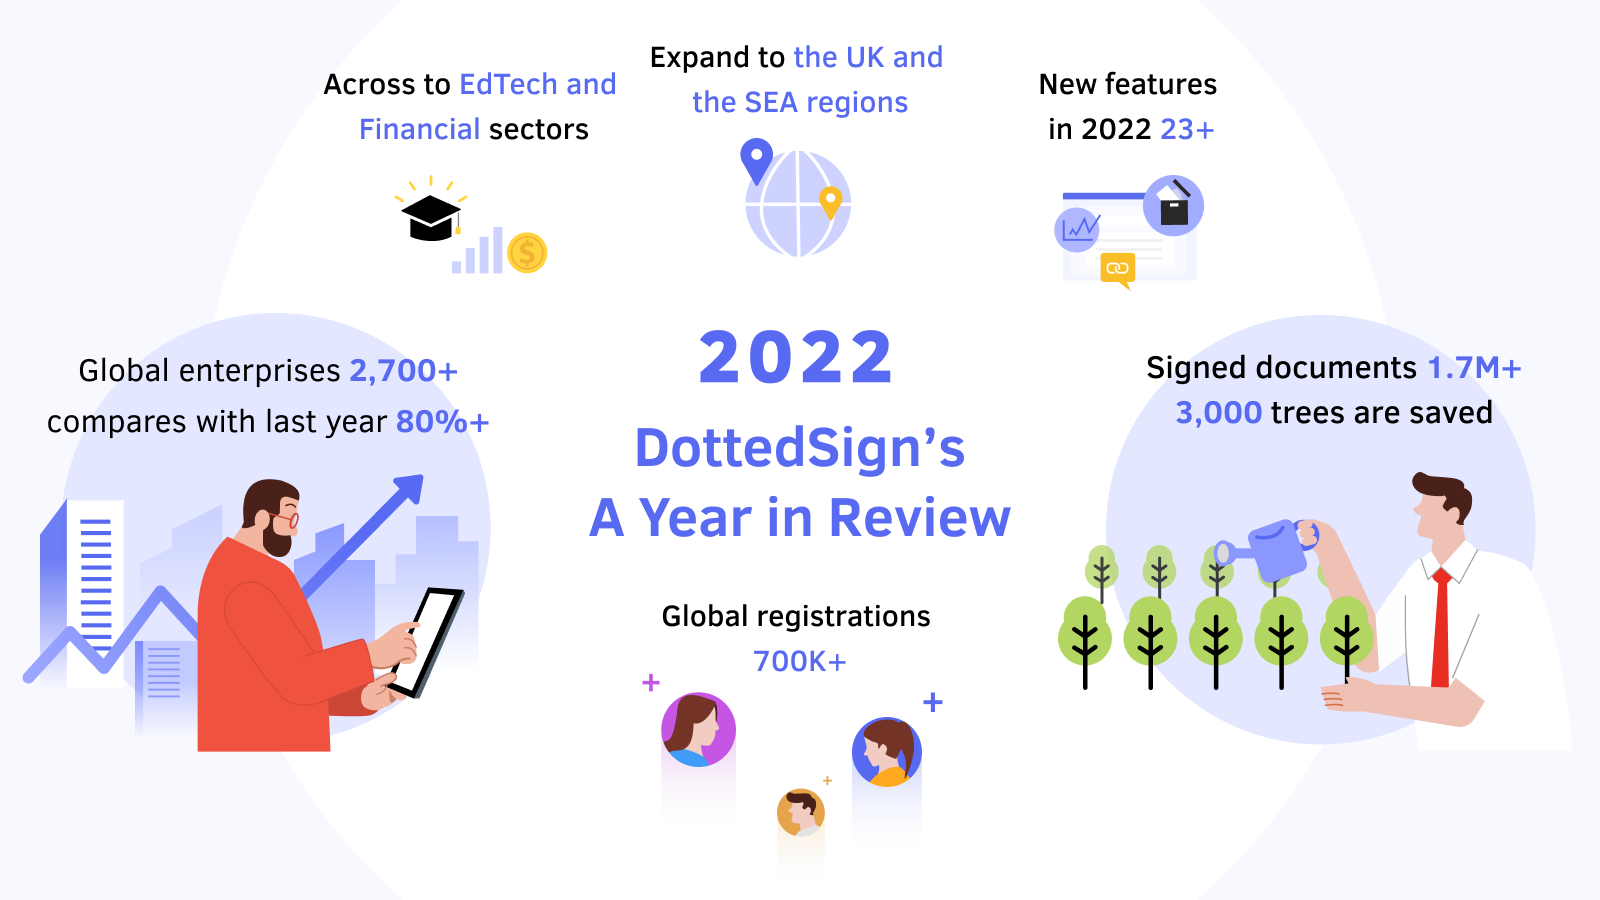 DottedSign’s 2022: A Year in Review